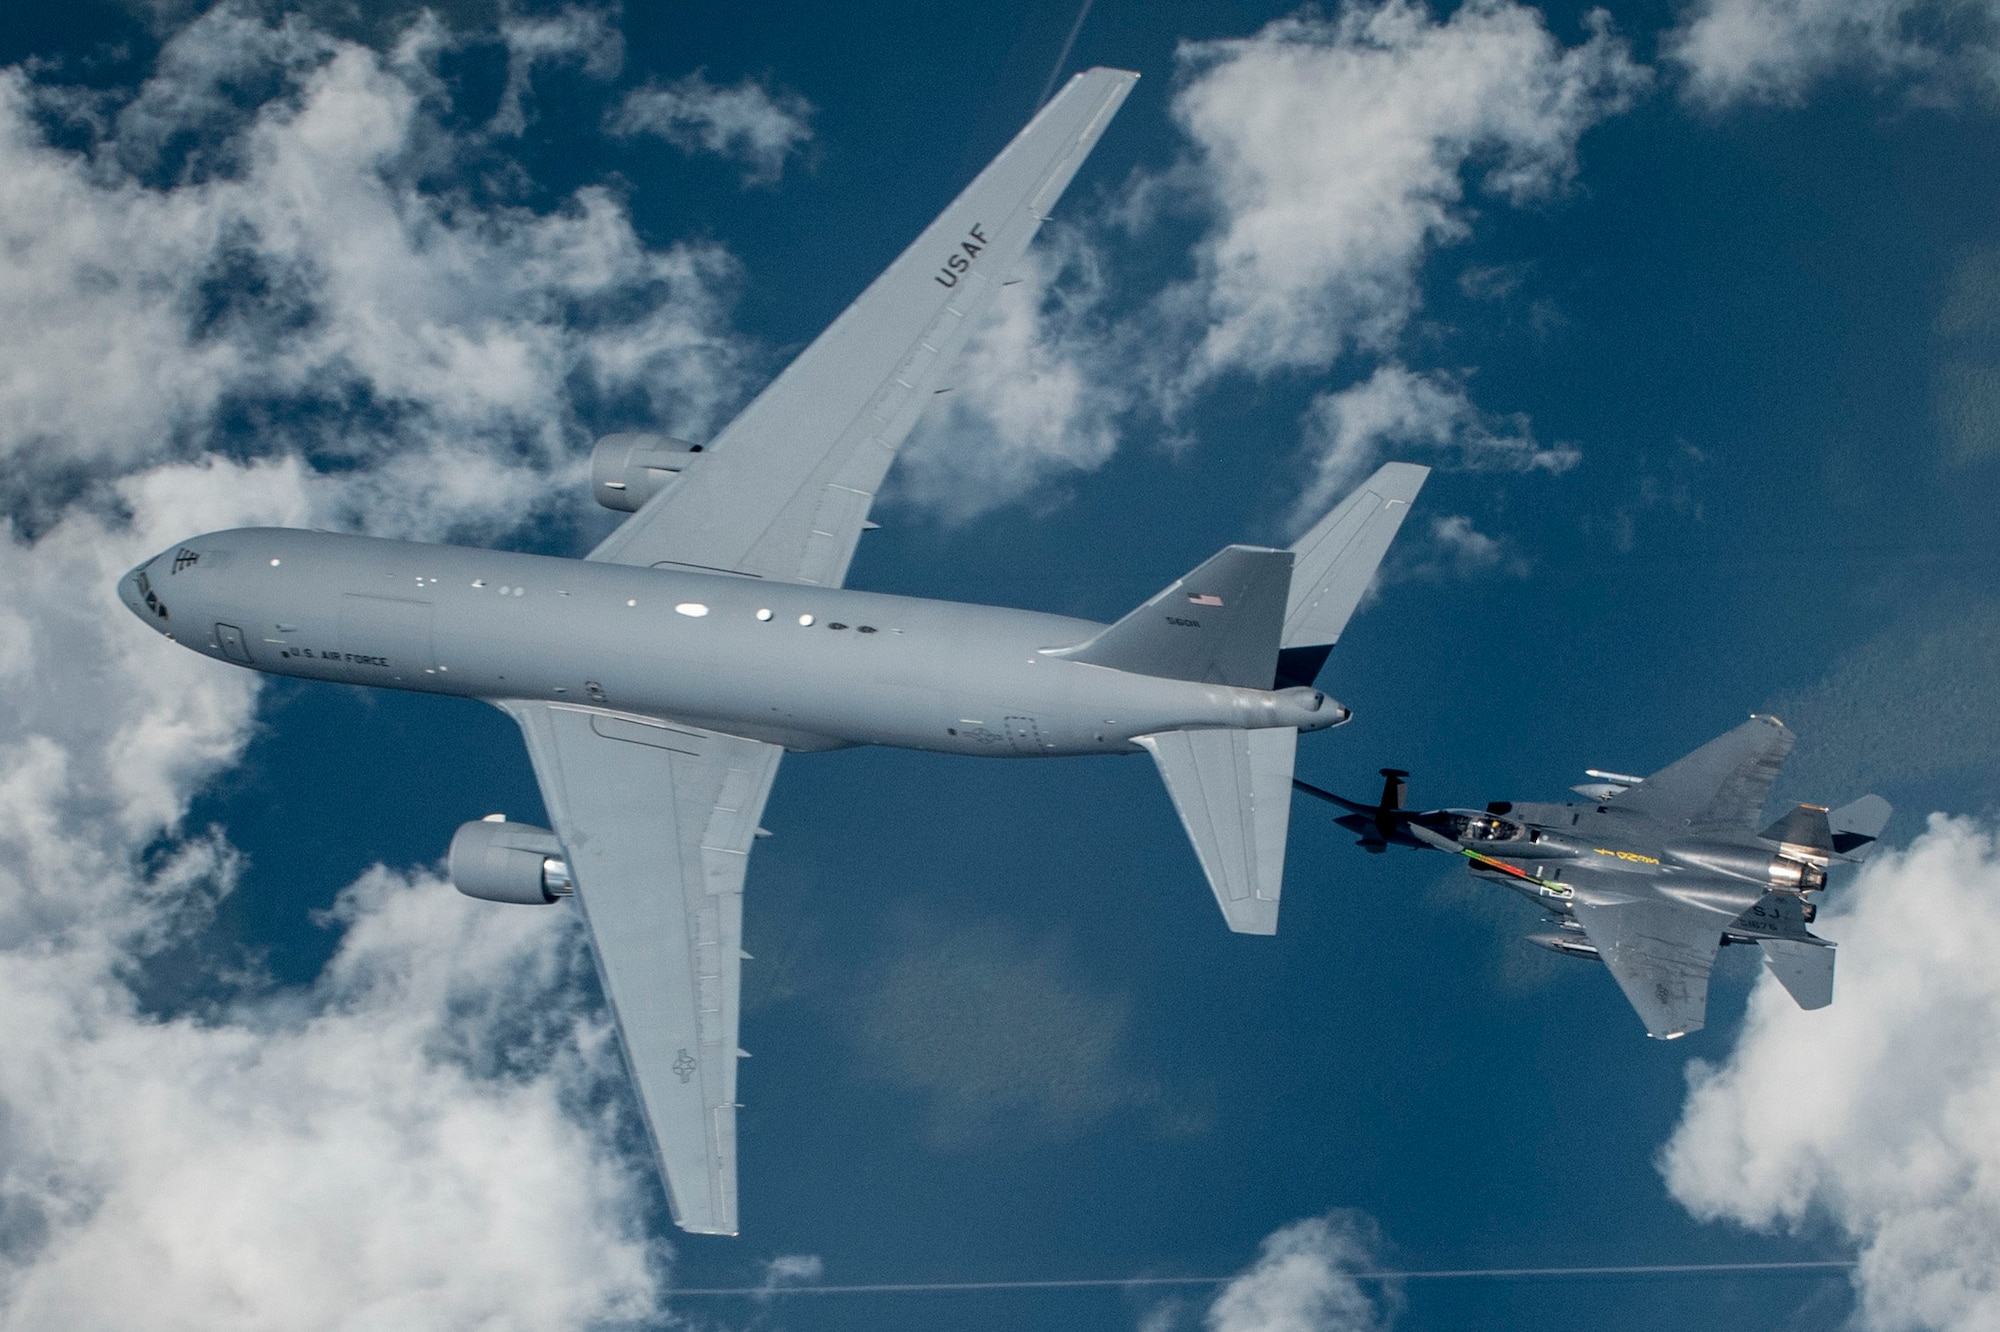 A KC-46 Pegasus from the 916th Air Refueling Wing in-air refuels an F-15E Strike Eagle from the 336th Fighter Squadron at Seymour Johnson Air Force Base over North Carolina.